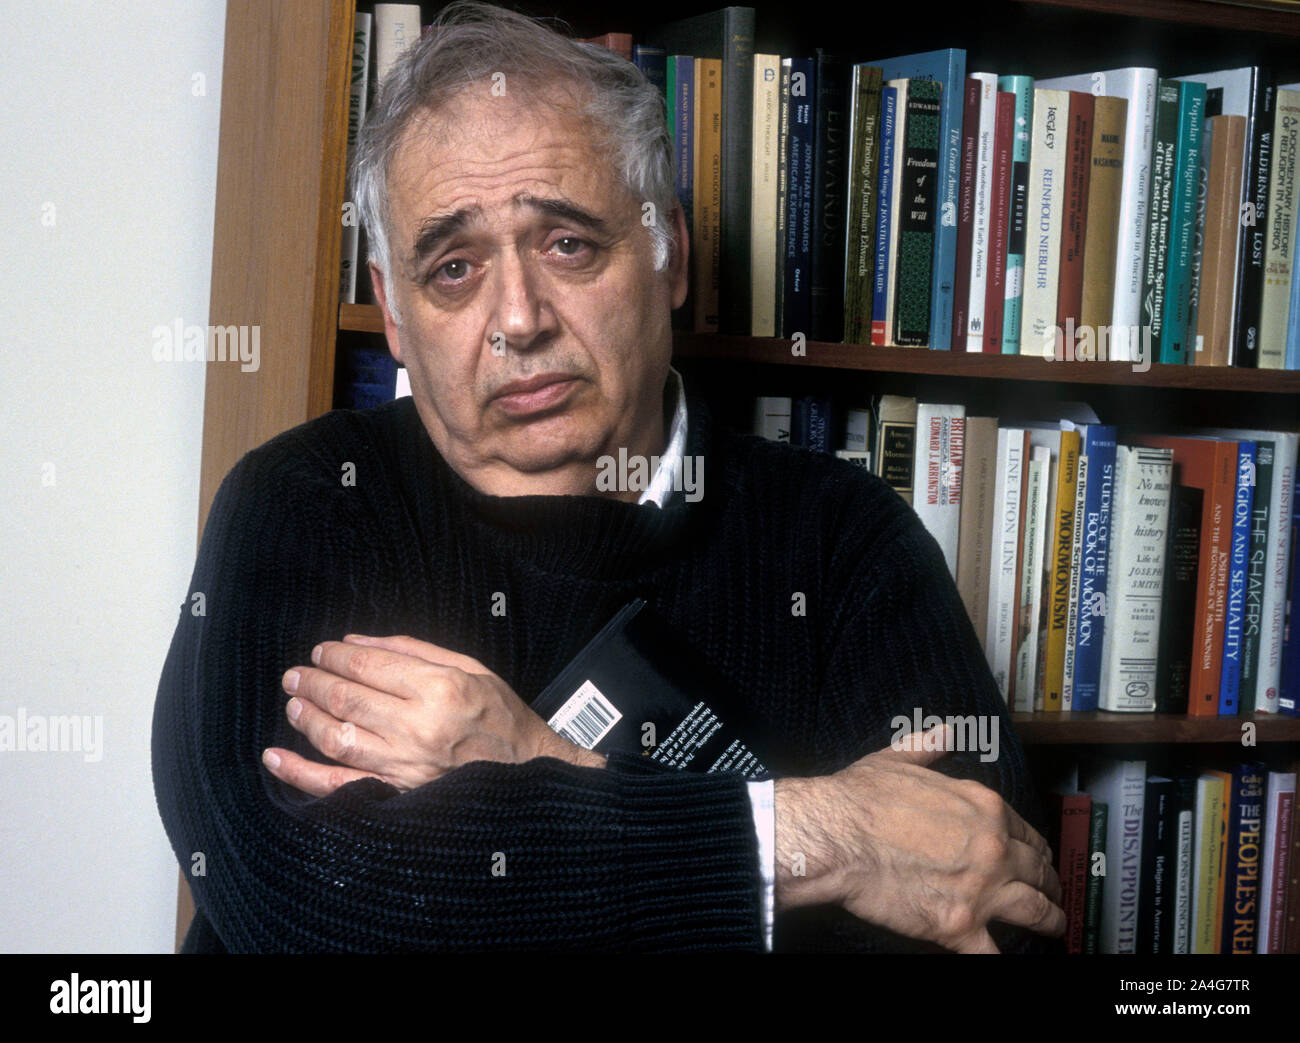 Professor Harold Bloom in his New York apartment. He answered questions from an interviewer resting on a day bed. Professor Harold Bloom answers questions during an interview in his New York apartment, May 12,1990. Harold Bloom, a prodigious literary critic who championed and defended the Western canon, published abundantly influential books that appeared not only on college syllabuses but also — unusual for an academic — on best-seller lists. Professor Bloom died on Monday October 14, 2019, at a hospital in New Haven. He was 89. Stock Photo